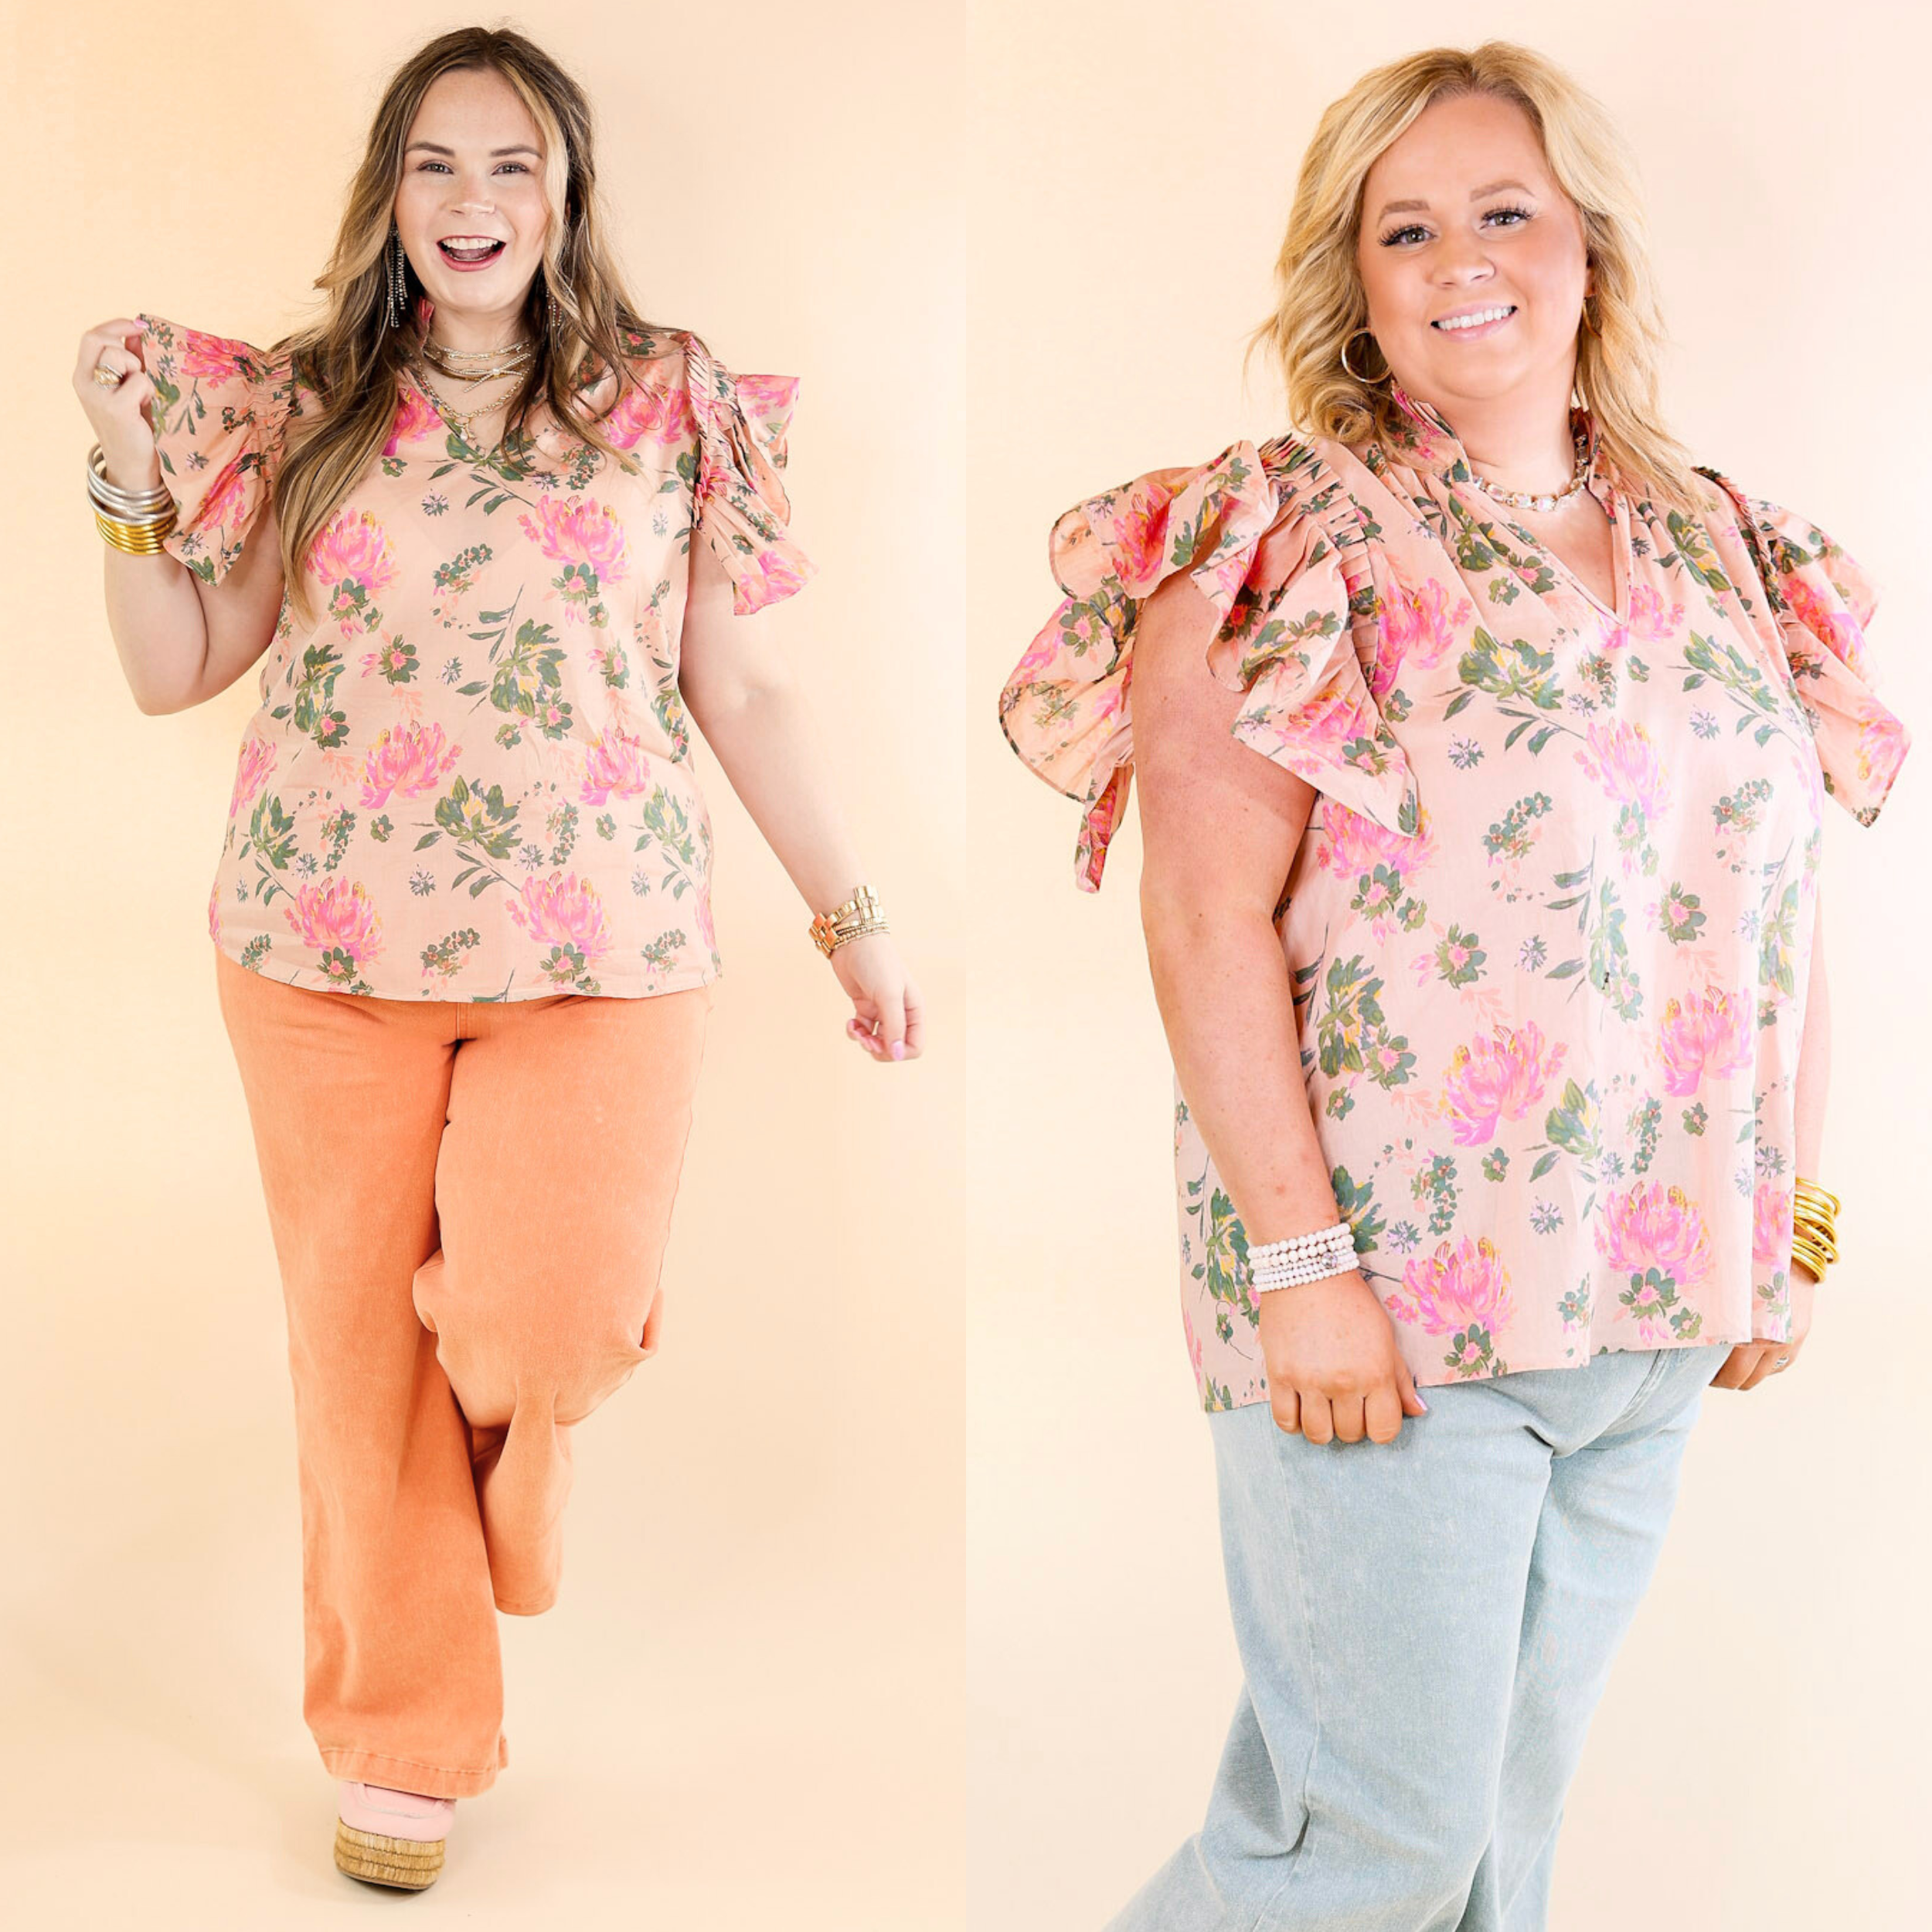 Blooming Chic Floral Print Top with Ruffle Cap Sleeves in Peach - Giddy Up Glamour Boutique